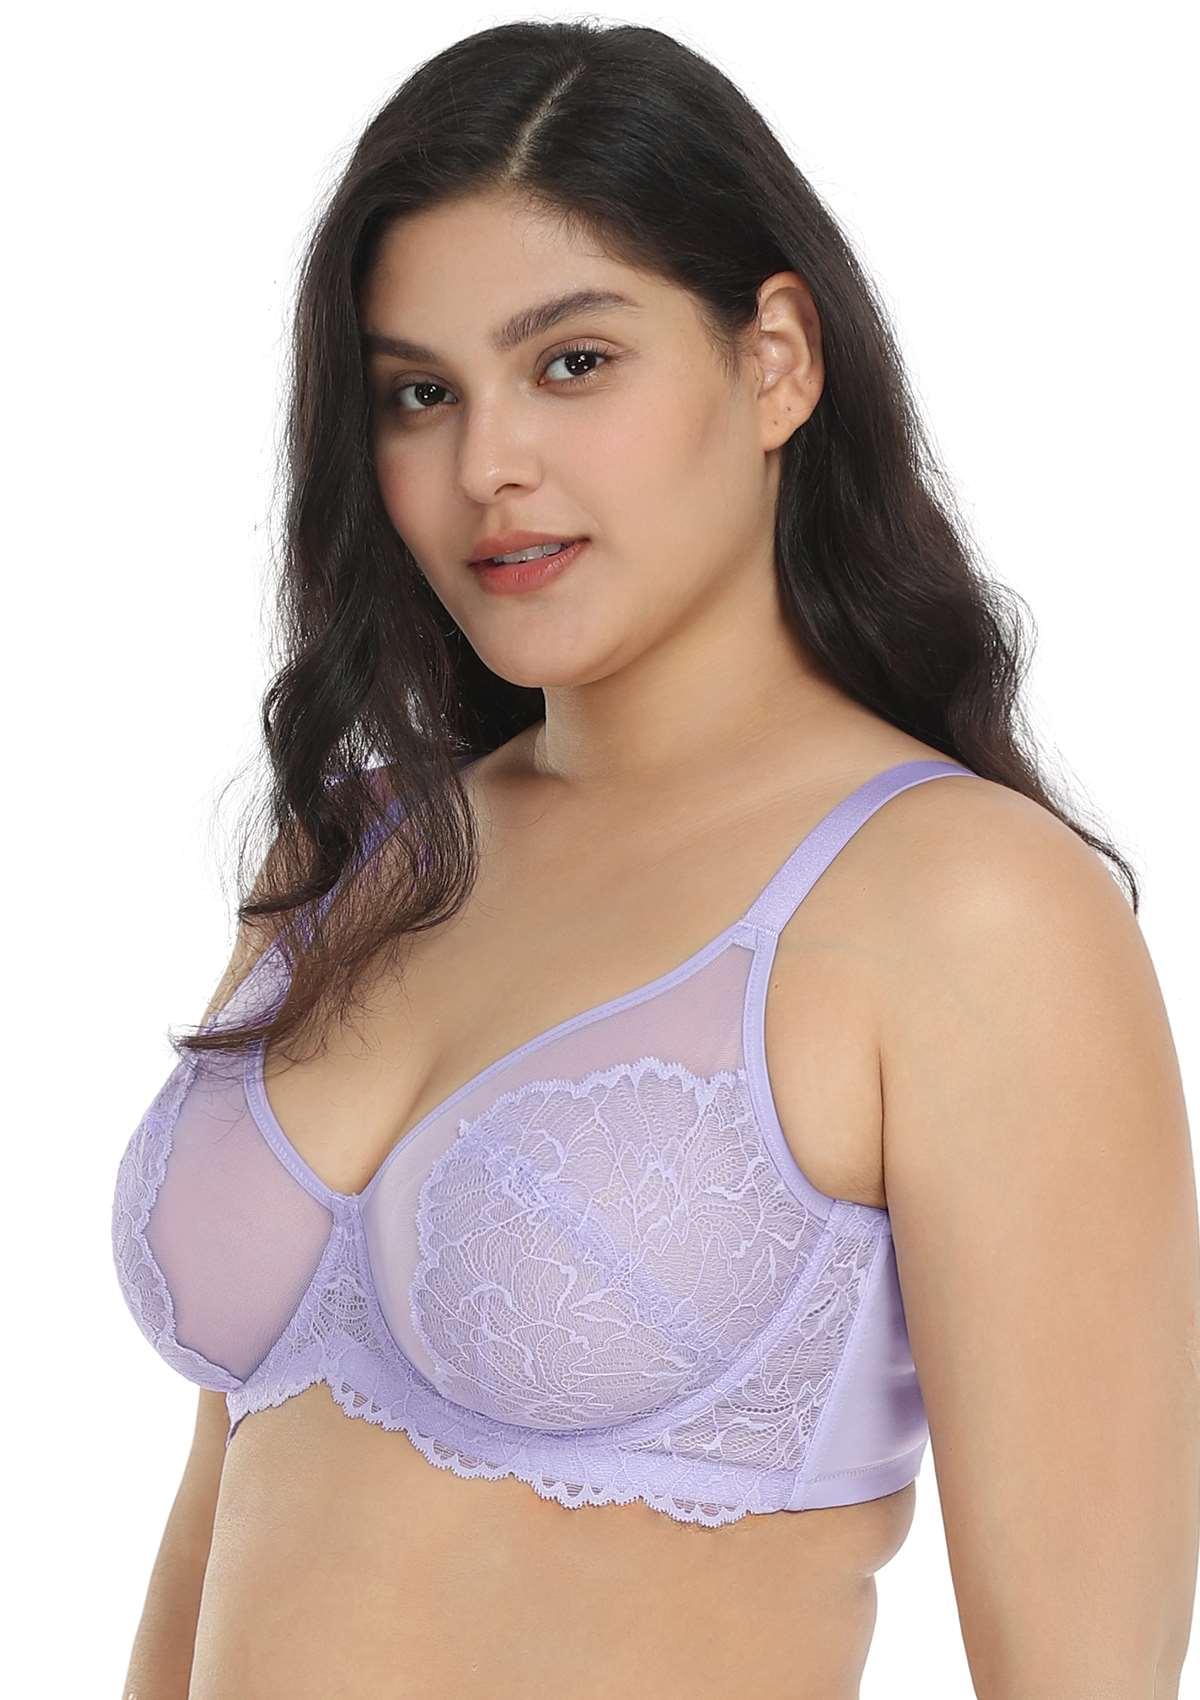 HSIA Blossom Transparent Lace Bra: Plus Size Wired Back Smoothing Bra - Purple / 34 / D